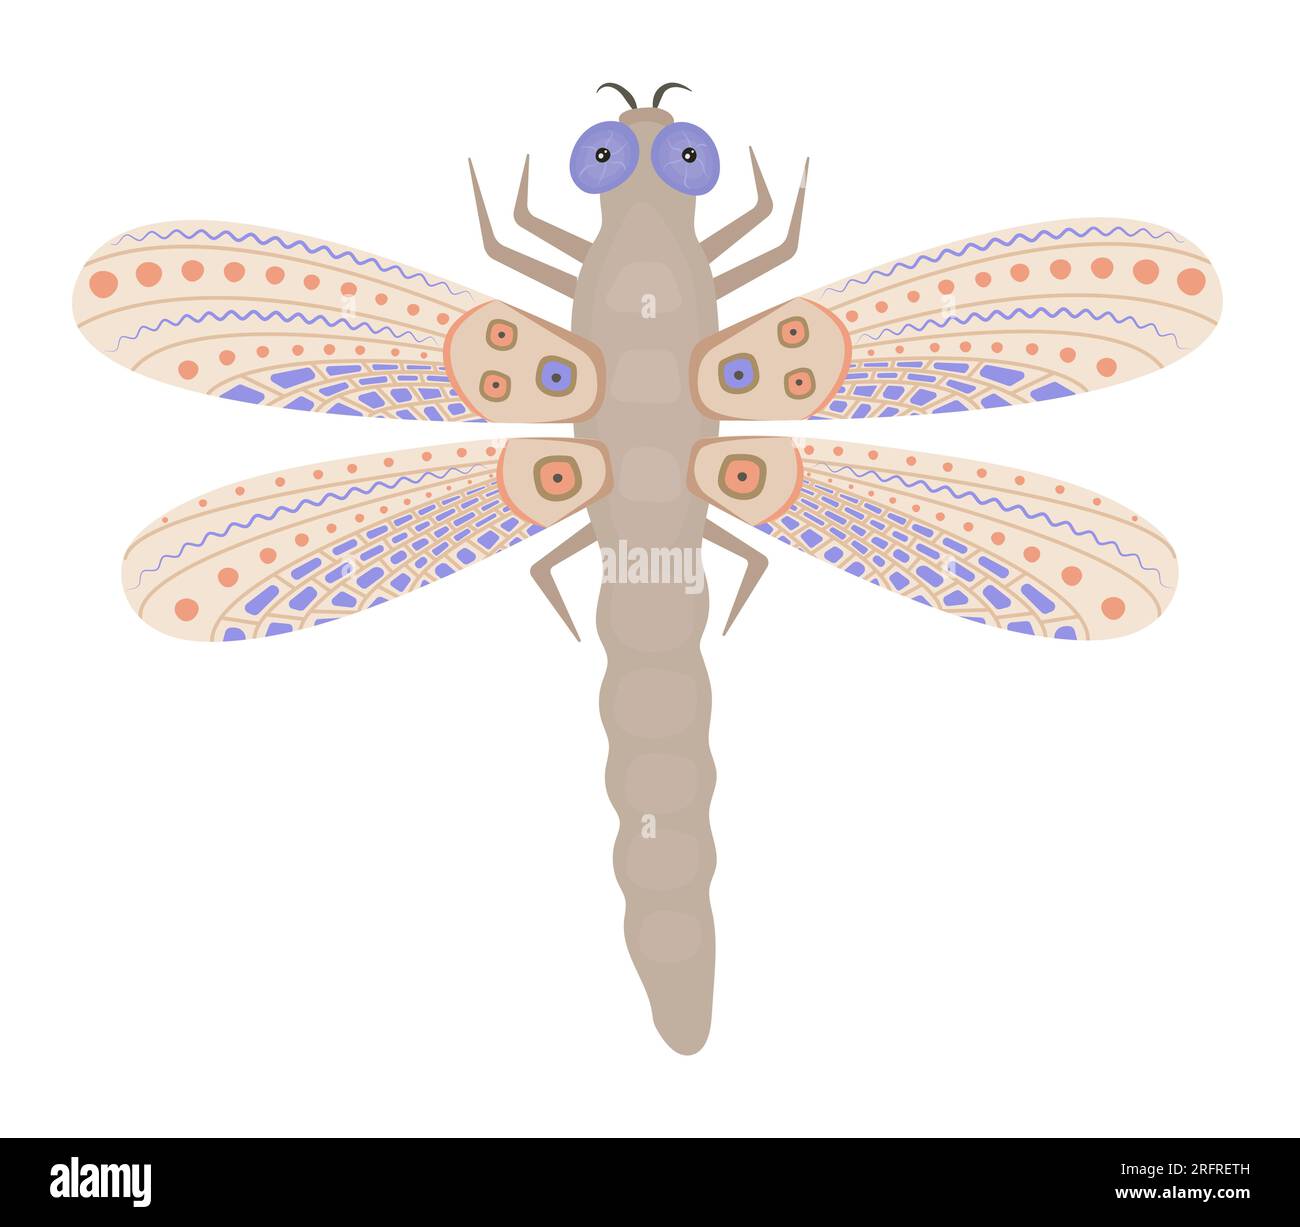 Cute beige dragonfly in kawaii and boho style Stock Vector